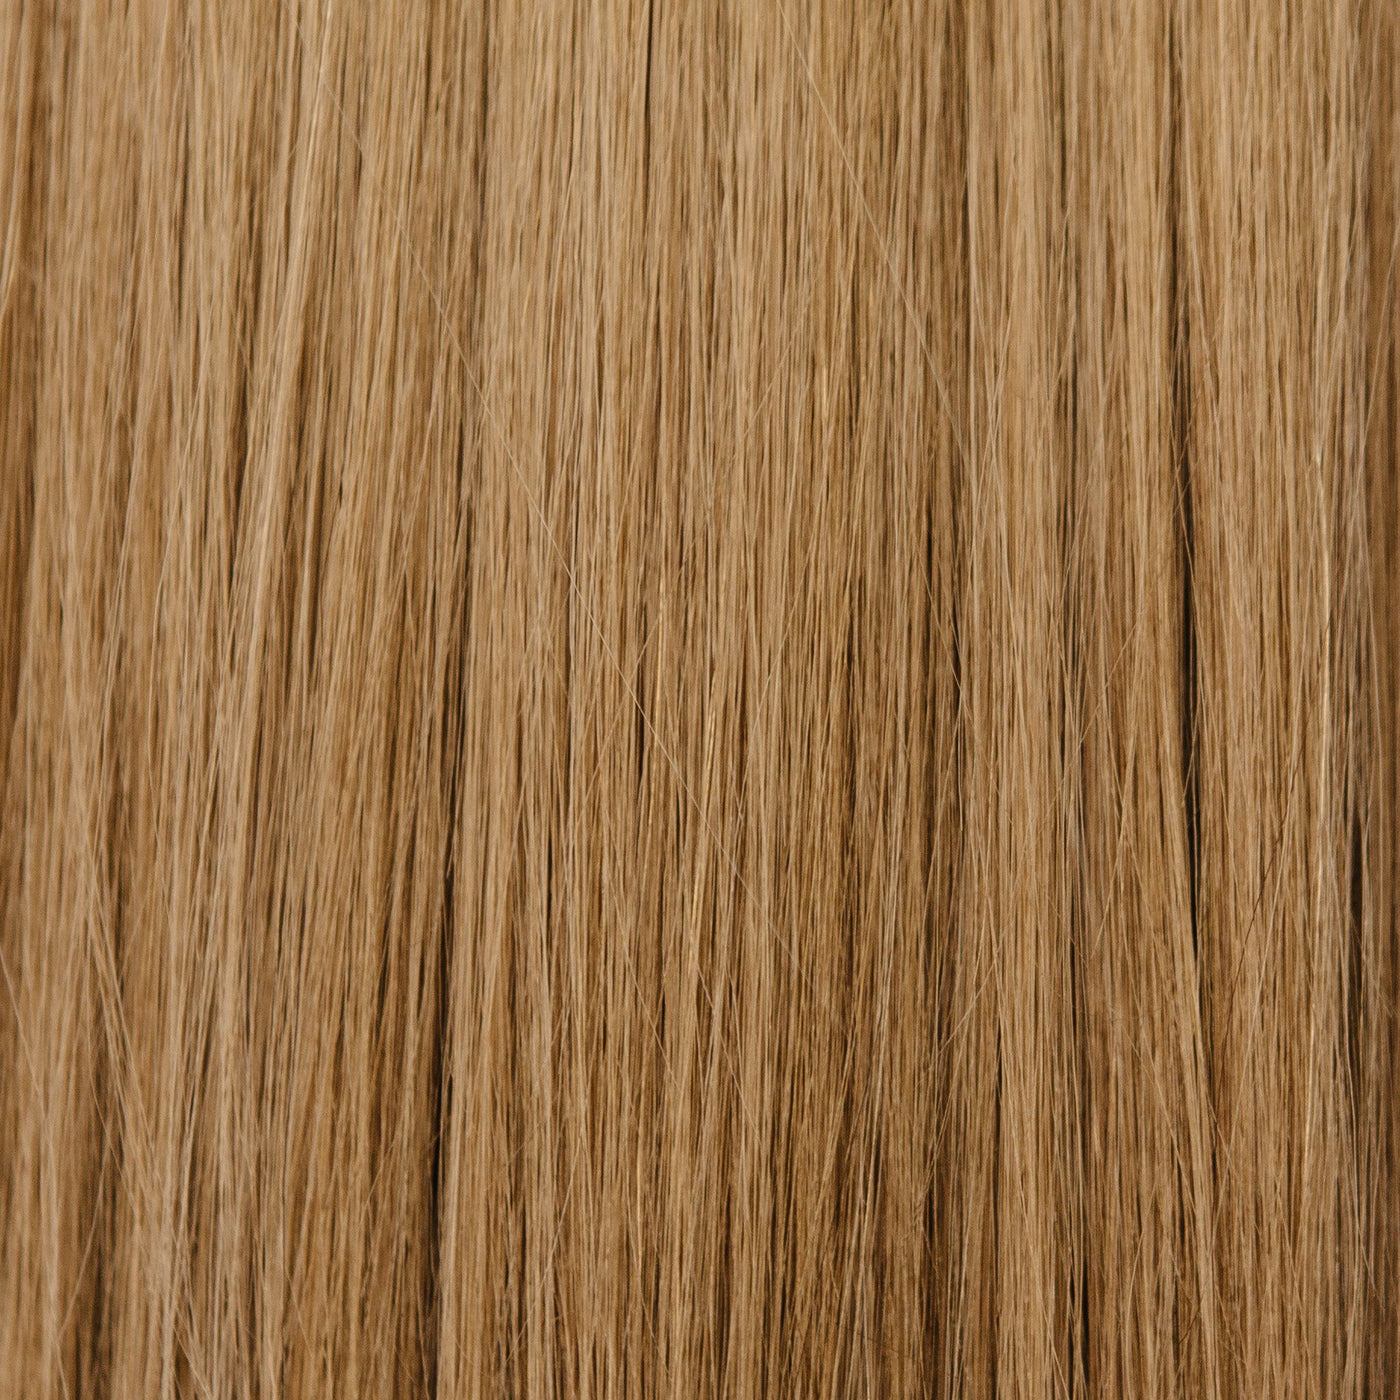 Laced Hair Machine Sewn Weft Extensions #14